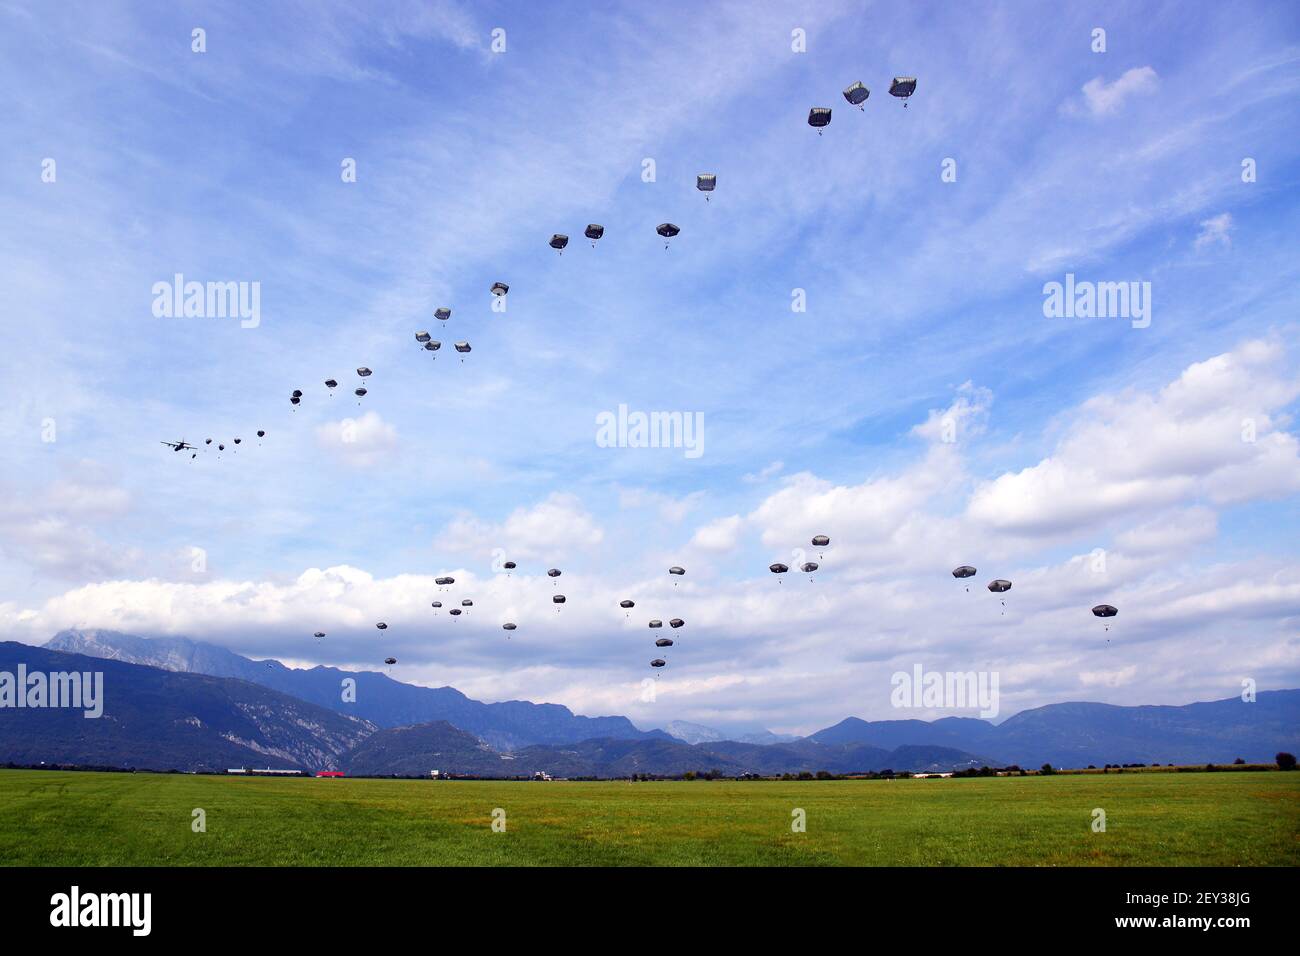 U.S. Army Paratroopers with the 173rd Brigade Support Battalion, 173rd Airborne Brigade Combat Team conduct an airborne operation with T-11 parachutes from a C-130 Hercules aircraft at Juliet Drop Zone in Pordenone, Italy, Sept. 24, 2014. The C-130 Hercules aircraft is assigned to the 86th Airlift Wing, based out of Ramstein Air Base, Germany. (Photo by Paolo Bovo, U.S. Army/DoD/Sipa USA) Stock Photo